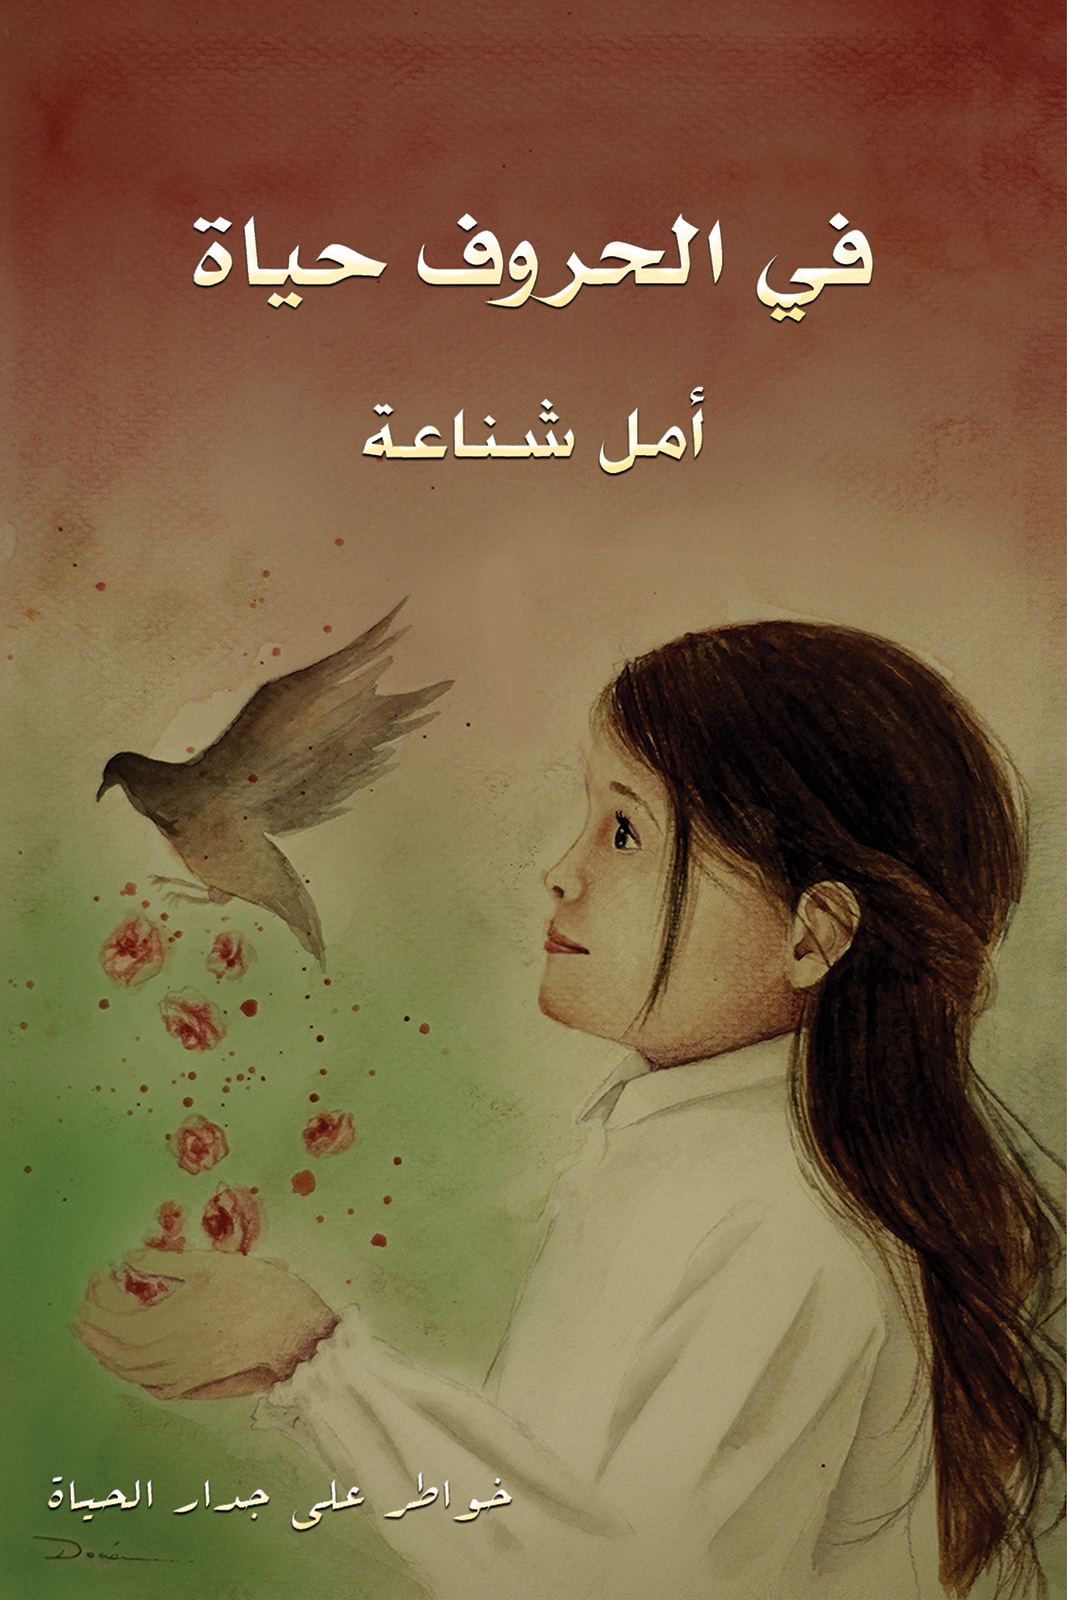 This image is the cover for the book في الحروف حياة